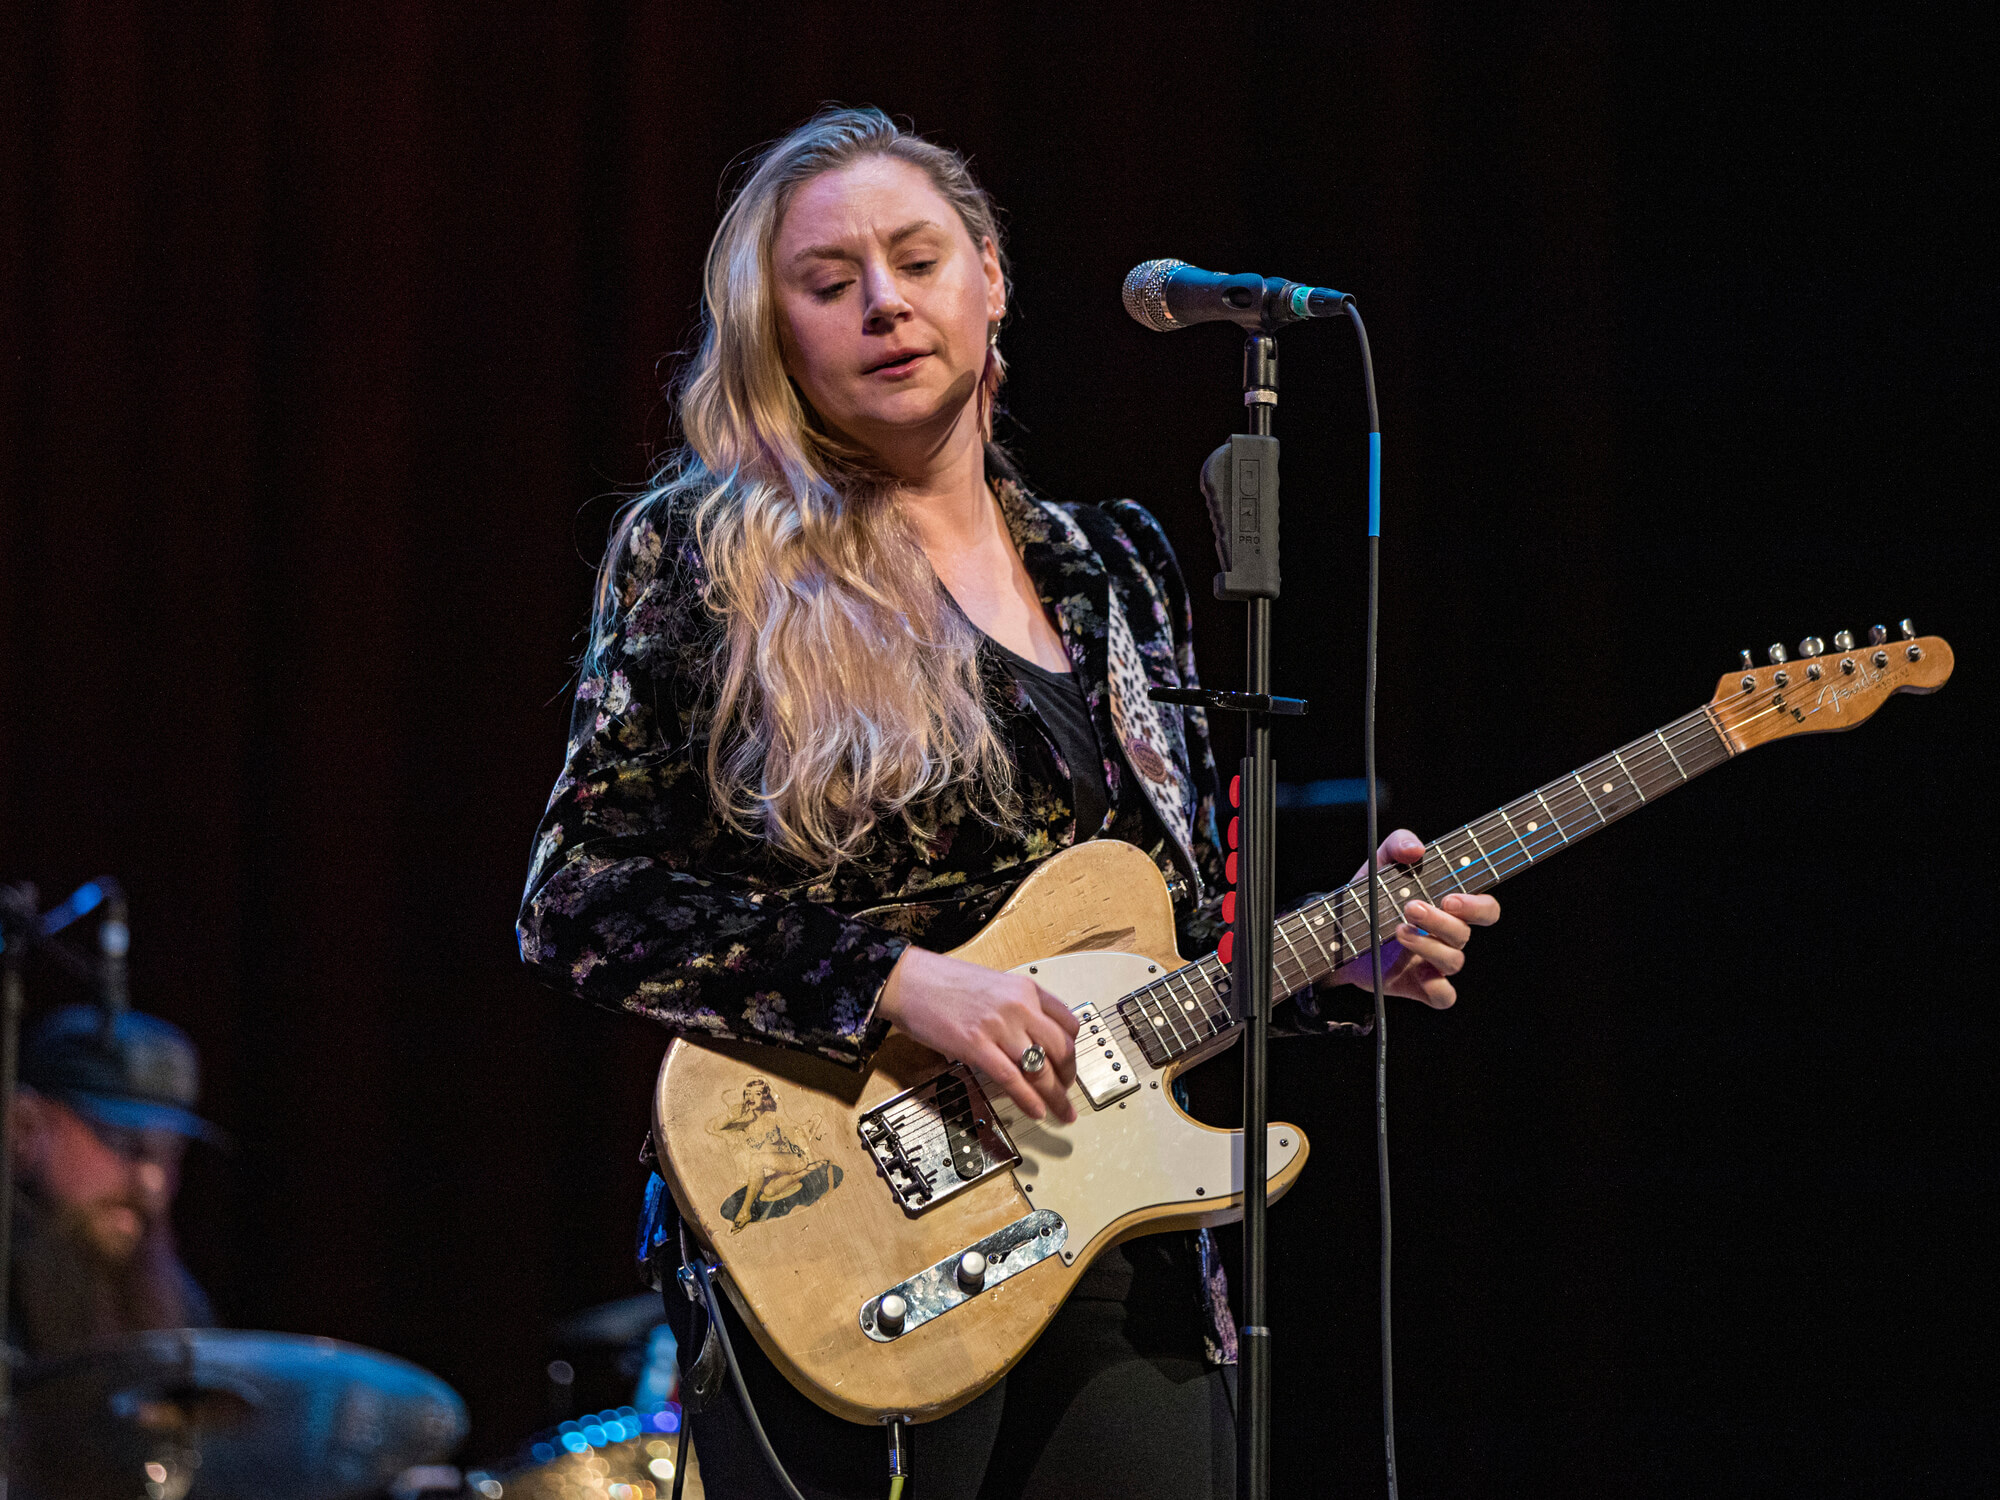 Musician Joanne Shaw Taylor performs on stage at Balboa Theatre